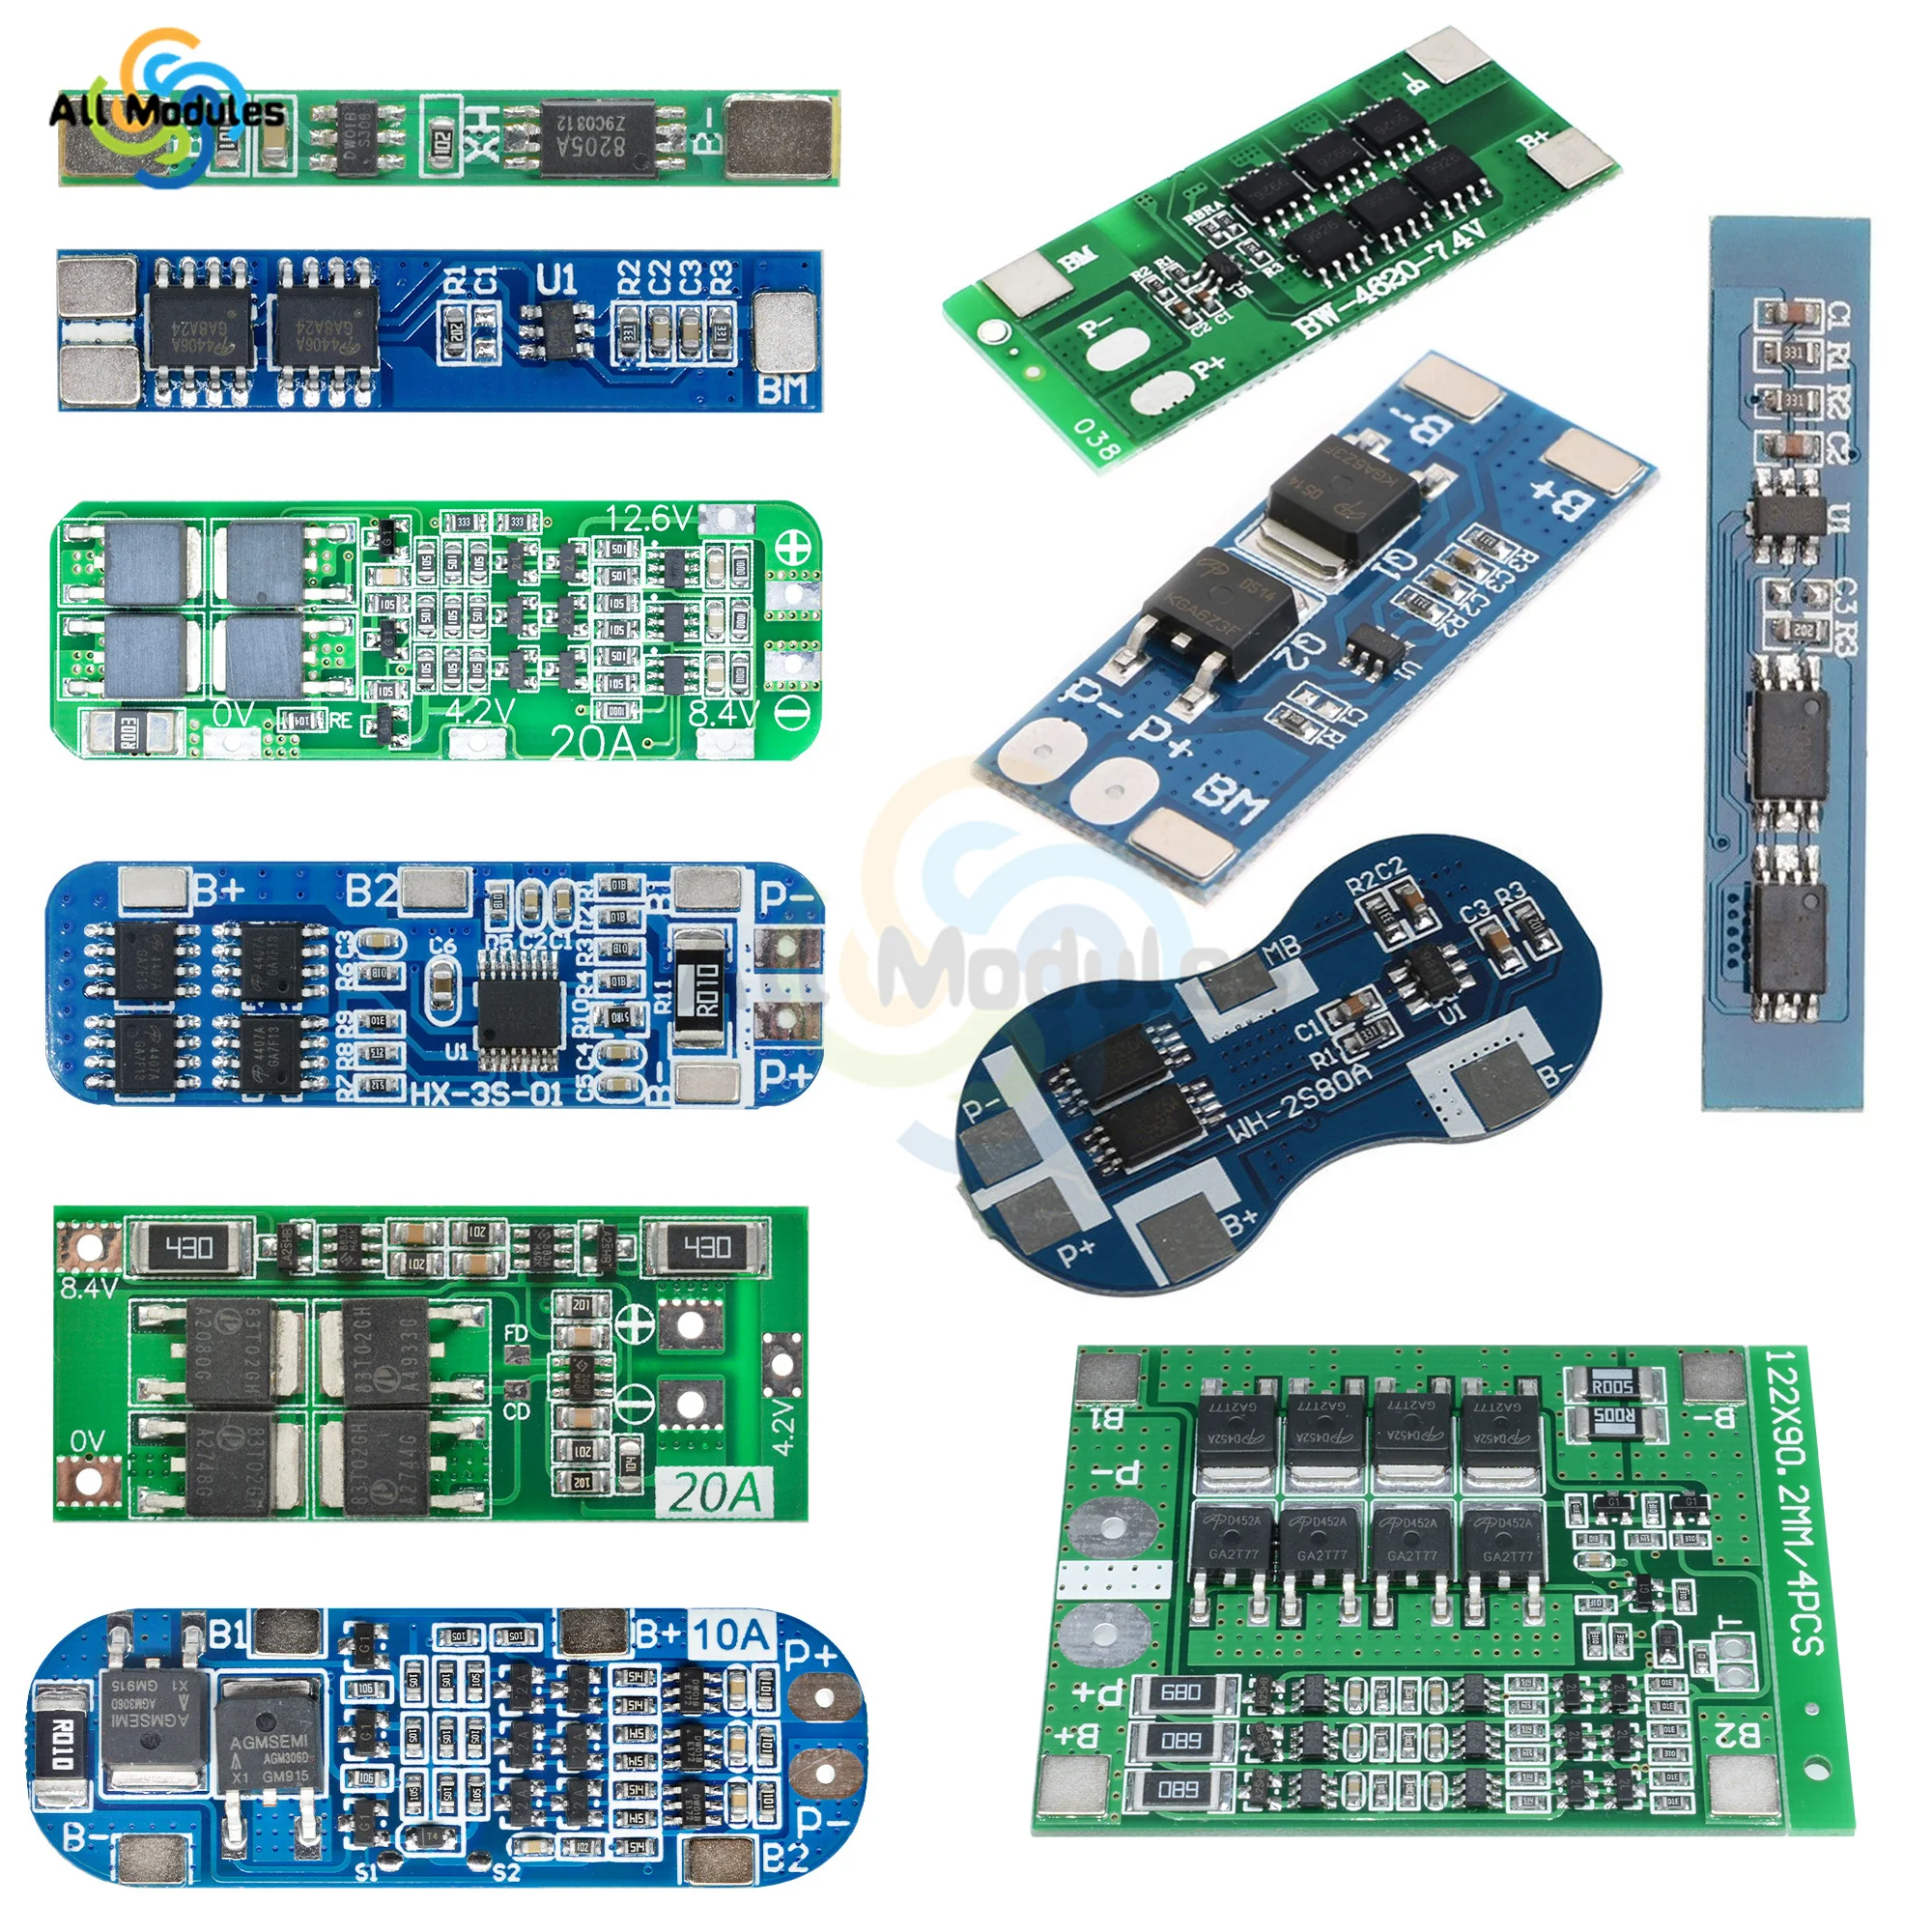 1S/2S/3S Li-ion 18650 Lithium battery protection board / BMS board Standard / Balance 2.5A 3A 4A 5A 8A 10A 12A 20A 25A